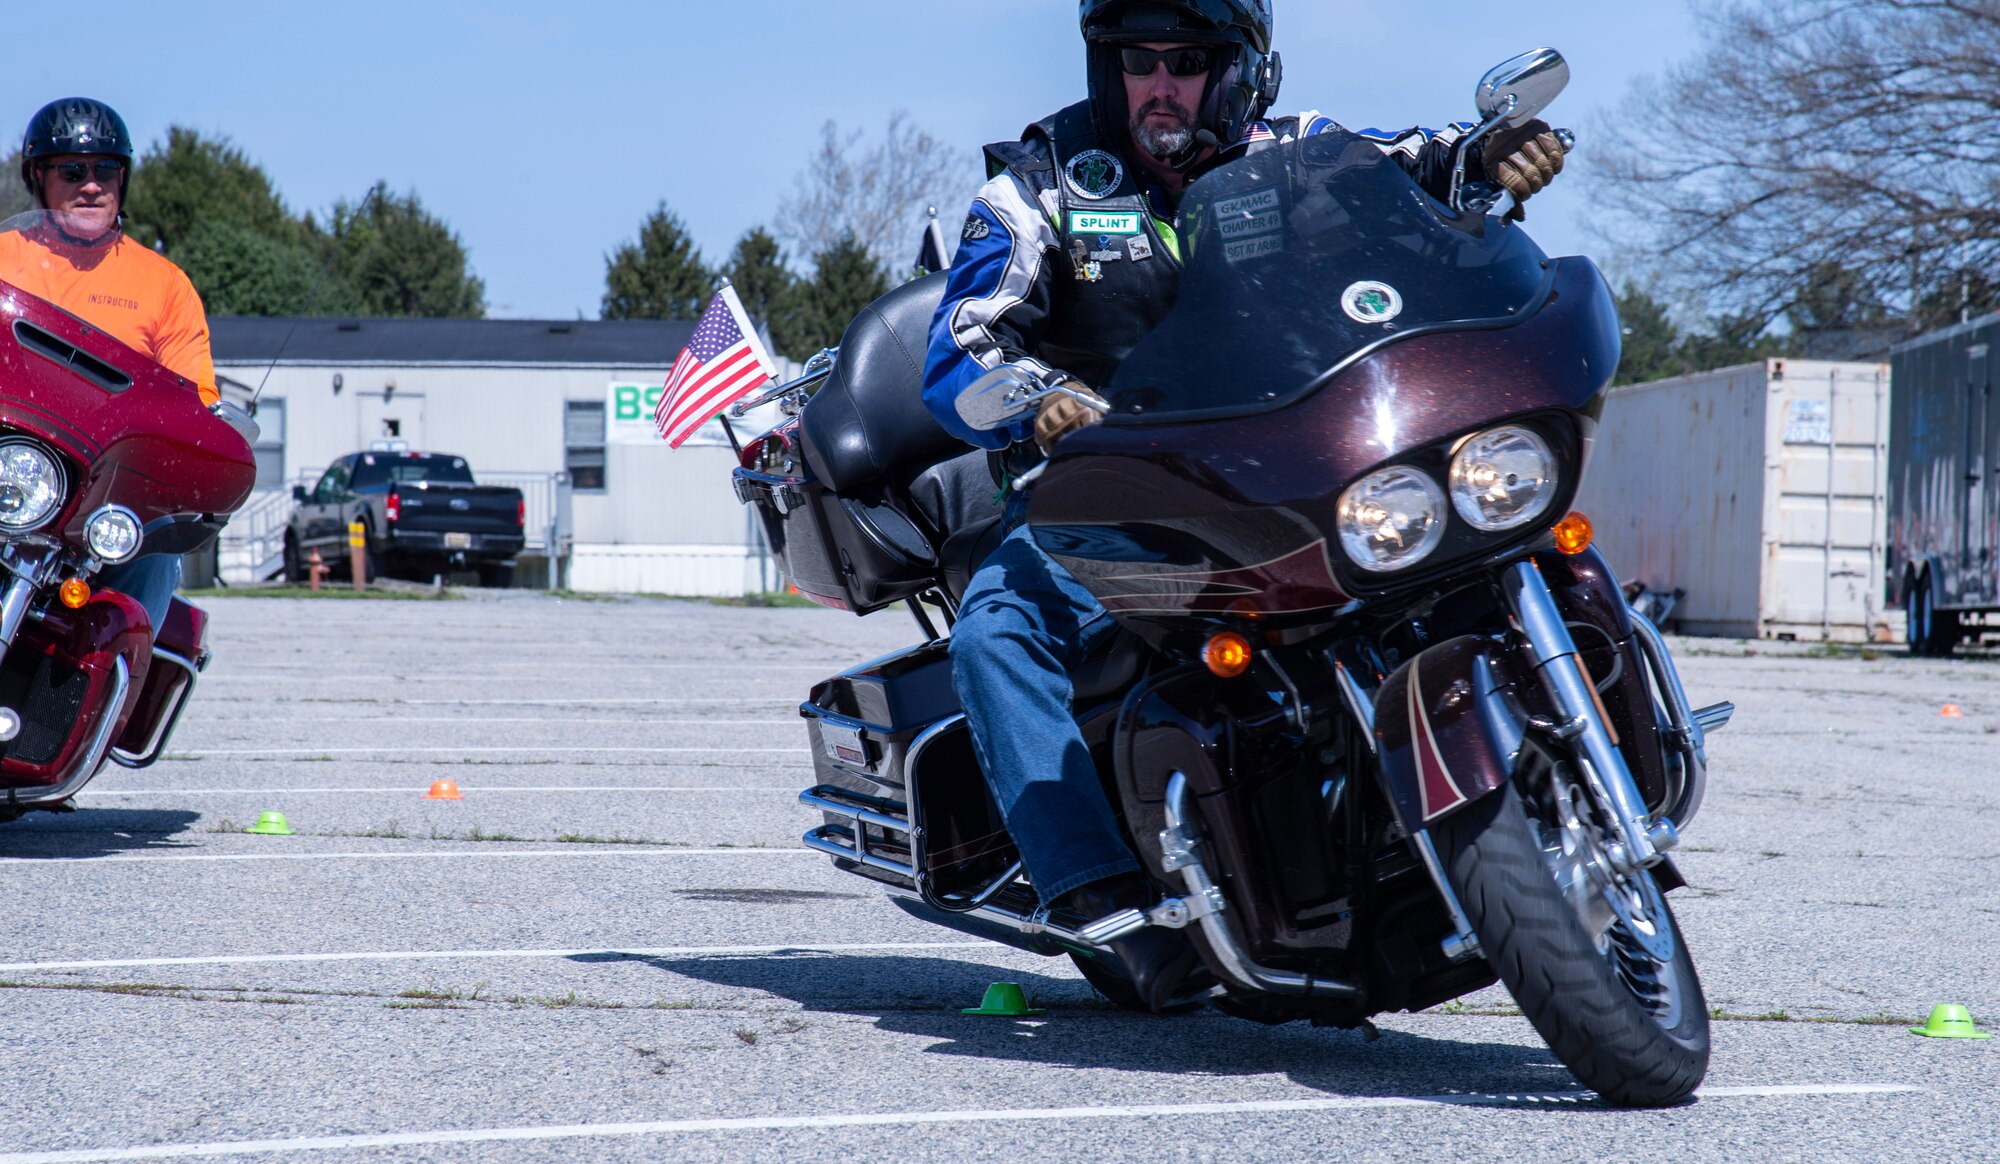 Ken Shinn, Green Knights Military Motorcycle Club, Chapter 49, sergeant at-arms, rides his motorcycle through an obstacle course during the 2022 Motorcycle Safety Day event at The Landings on Dover Air Force Base, Delaware, April 29, 2022. Organized by the 436th Airlift Wing Safety Office, “The Message of Mentorship” was this year’s theme as riders listened to numerous guest speakers, received refresher training, observed motorcycle demonstrations and participated in a planned ride throughout central Delaware. (U.S. Air Force photo by Roland Balik)